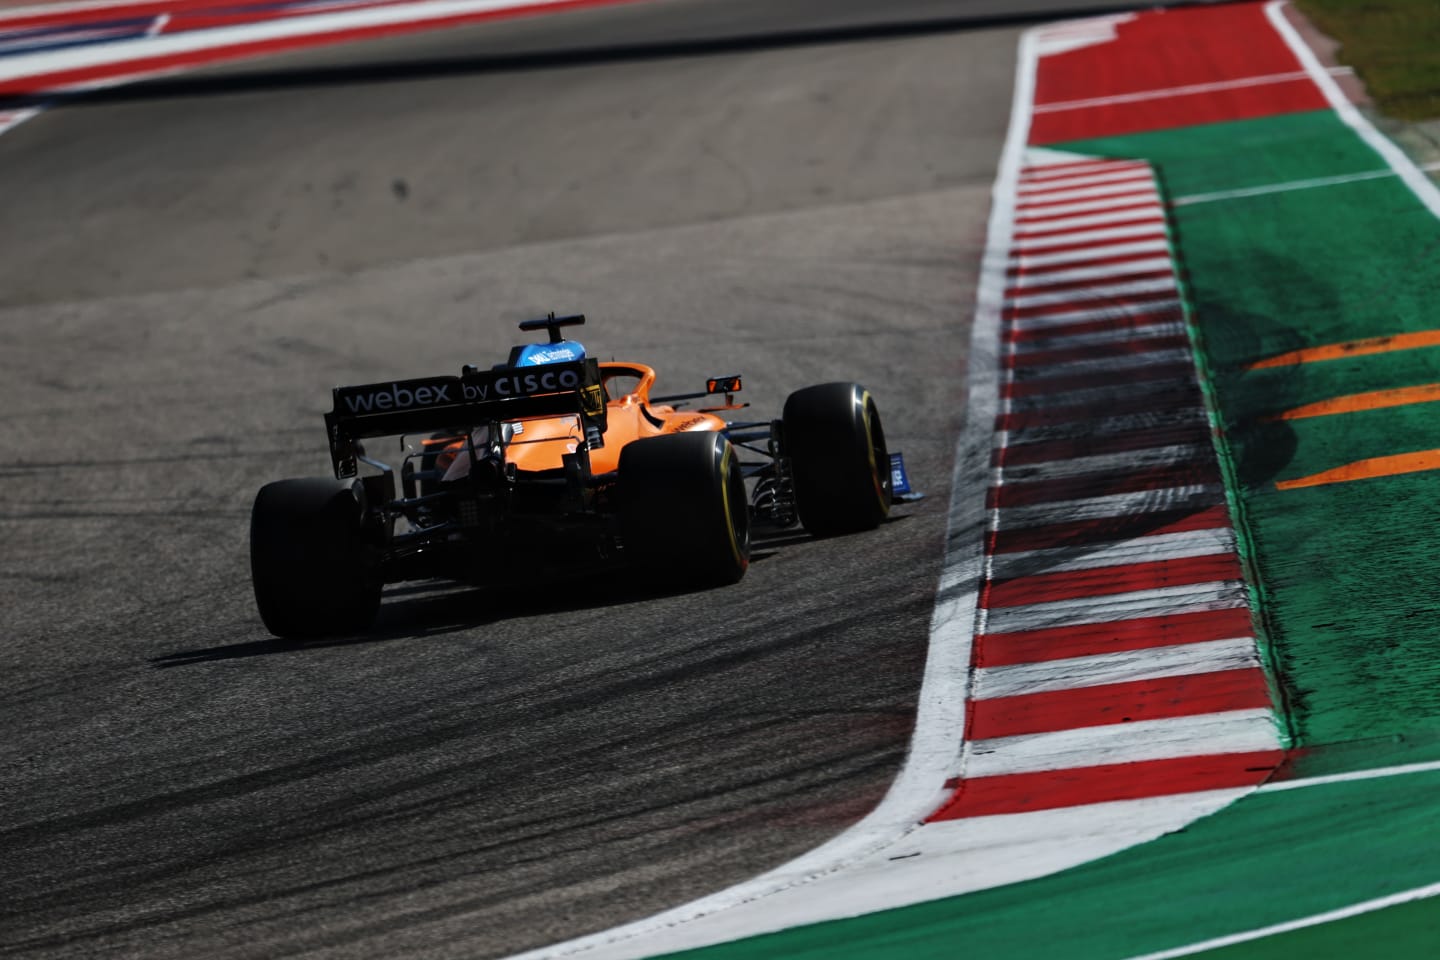 AUSTIN, TEXAS - OCTOBER 24: Daniel Ricciardo of Australia driving the (3) McLaren F1 Team MCL35M Mercedes on track during the F1 Grand Prix of USA at Circuit of The Americas on October 24, 2021 in Austin, Texas. (Photo by Chris Graythen/Getty Images)